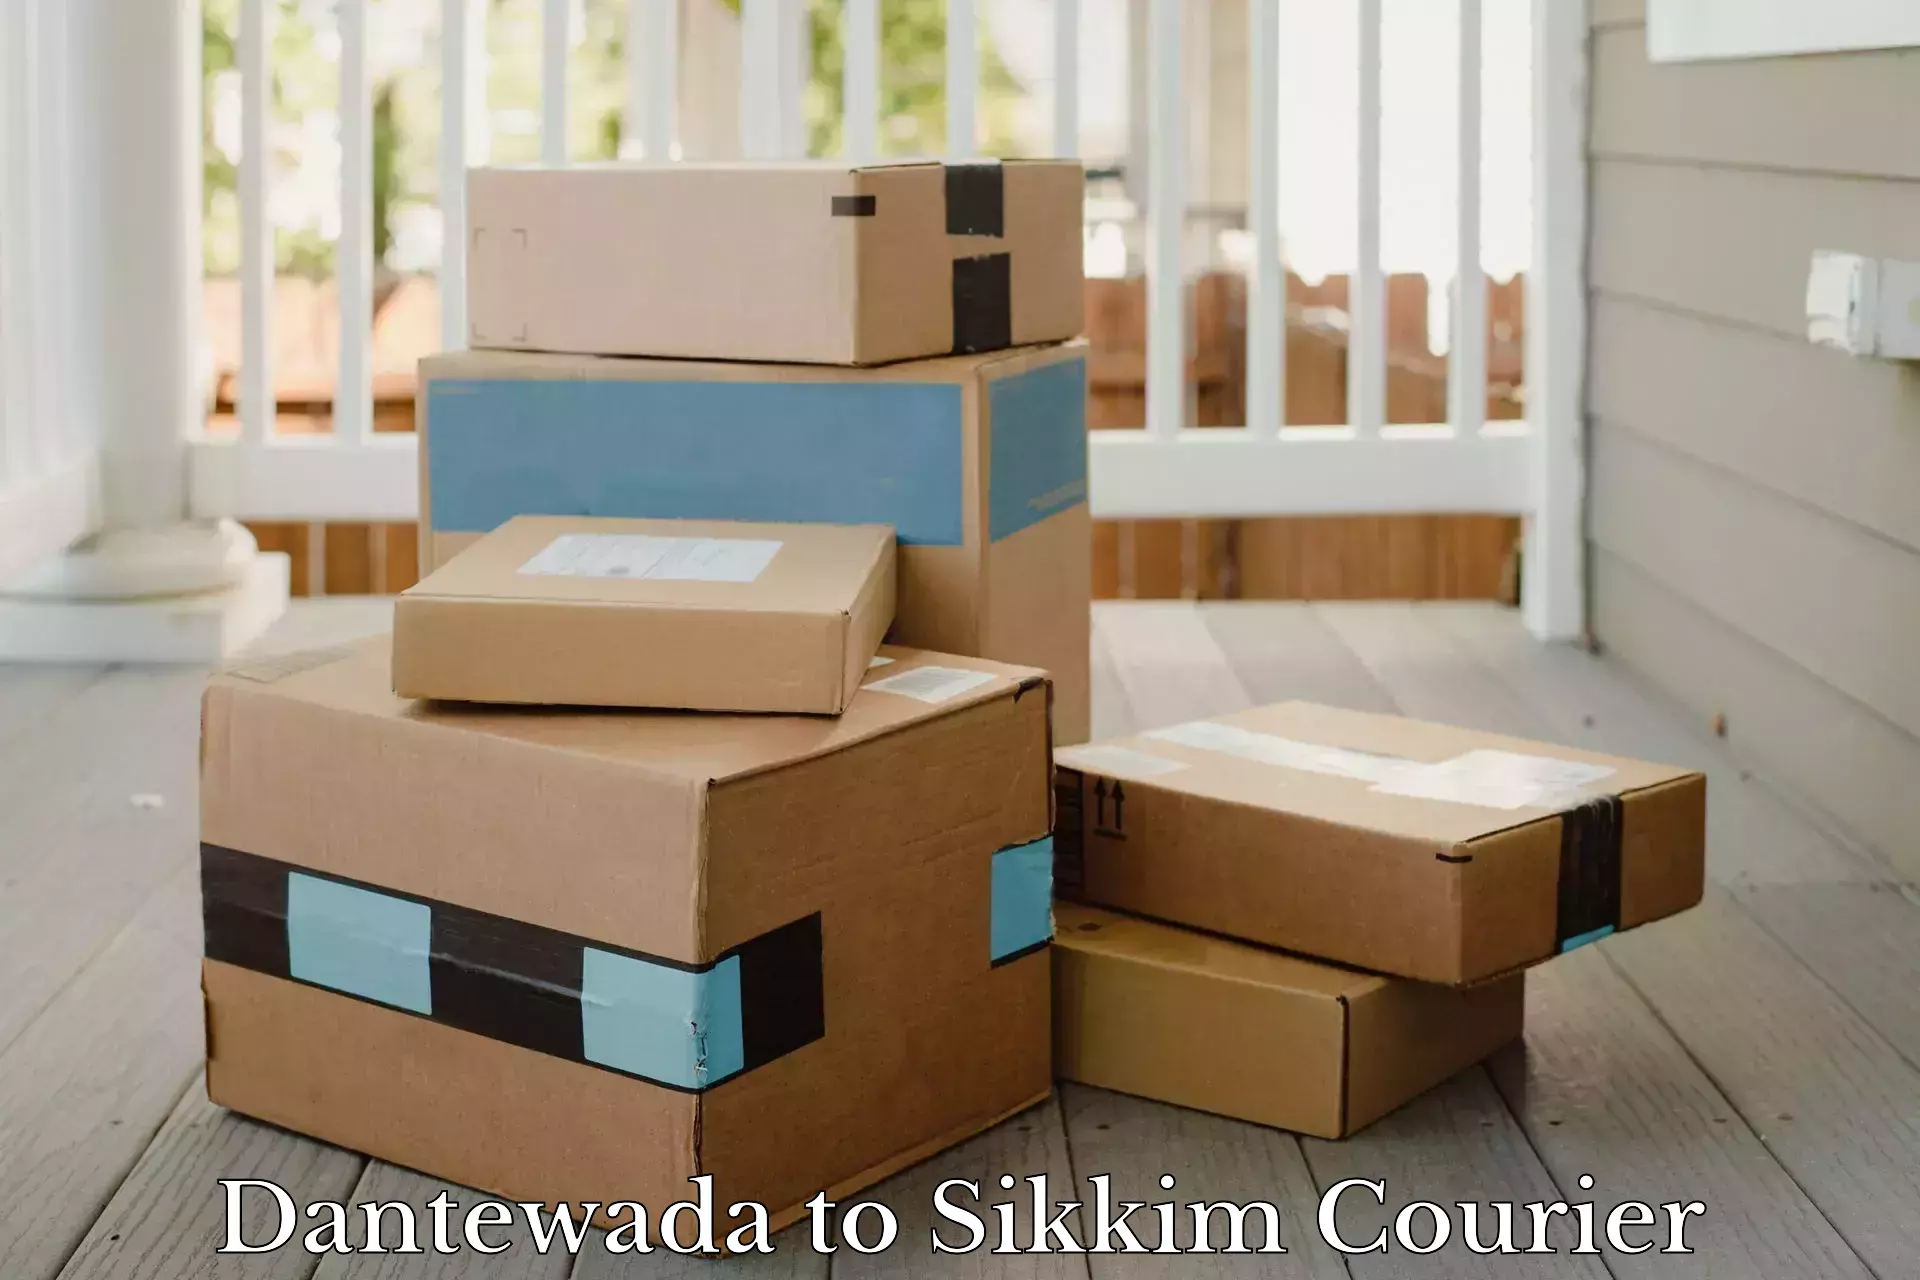 Delivery service partnership Dantewada to East Sikkim